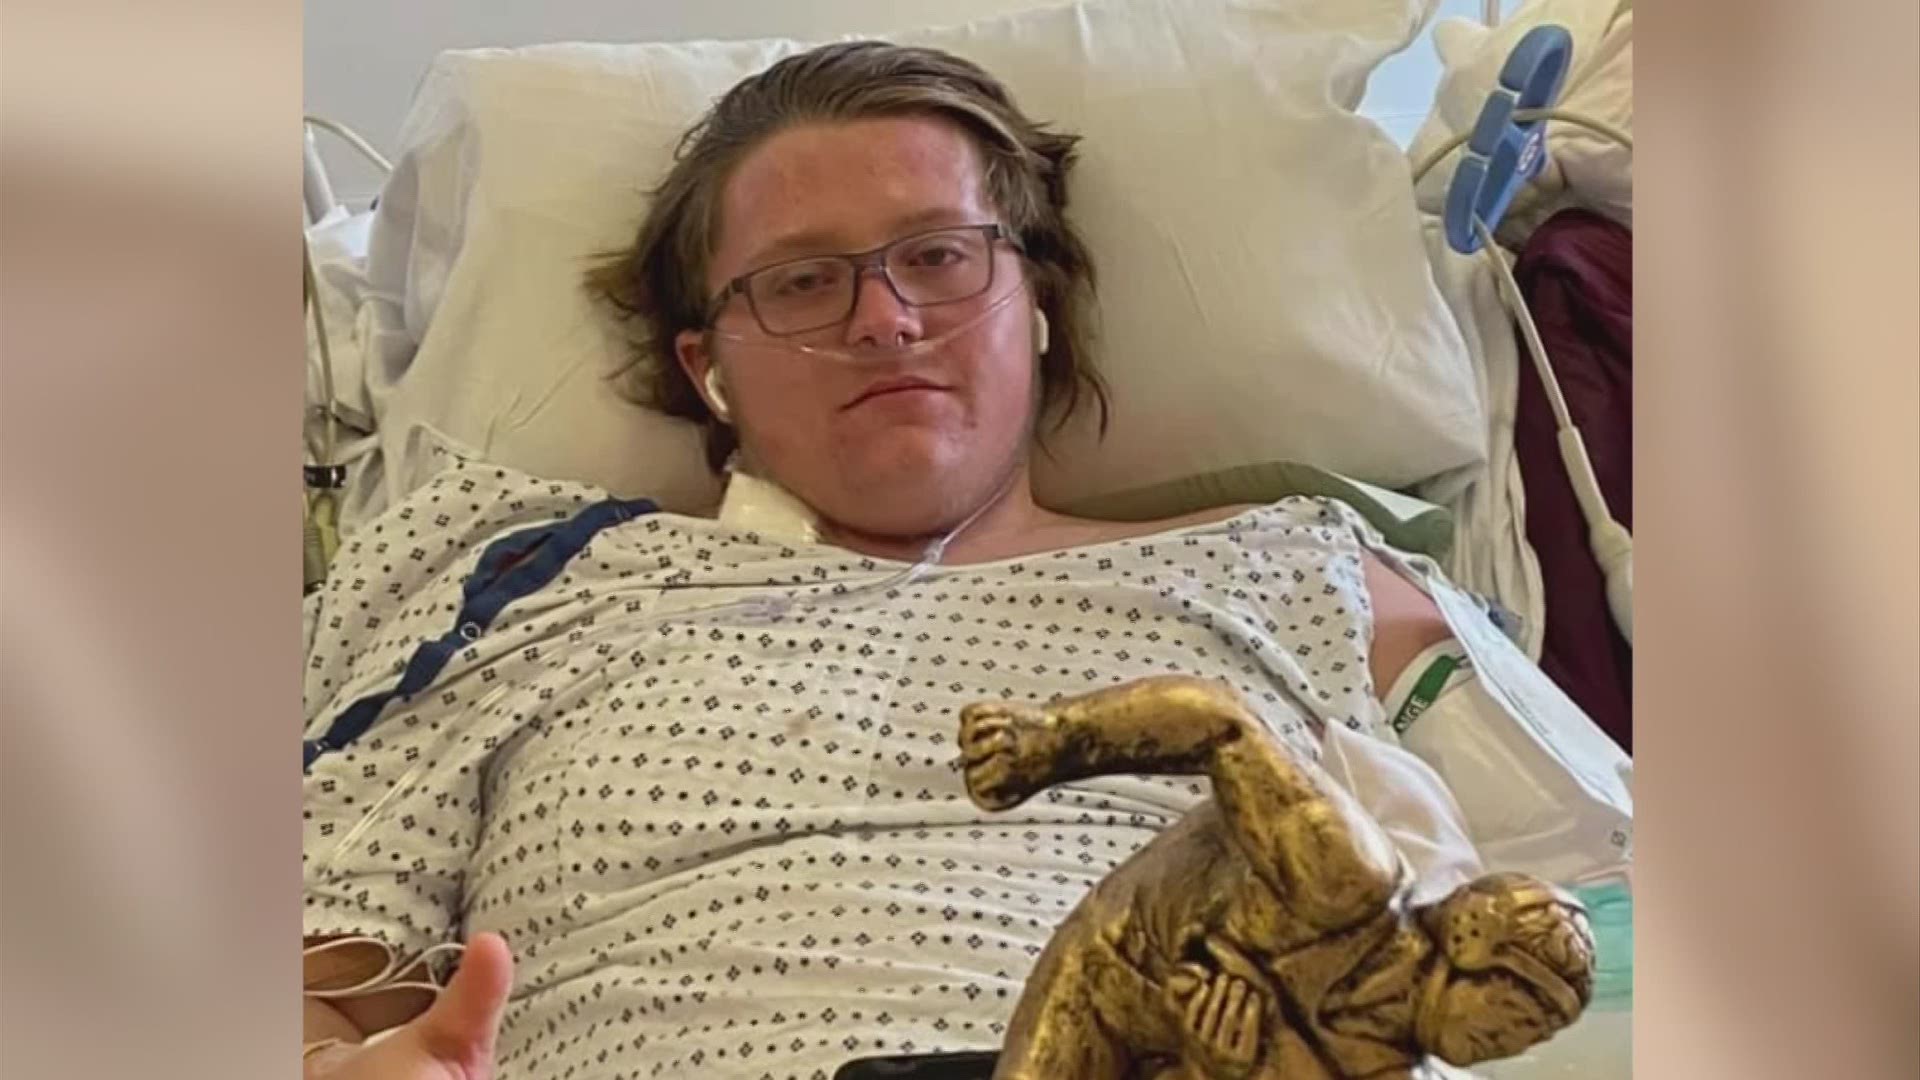 Gavin Braden started to feel sick on Jan. 12. Two days later, he was in the hospital.